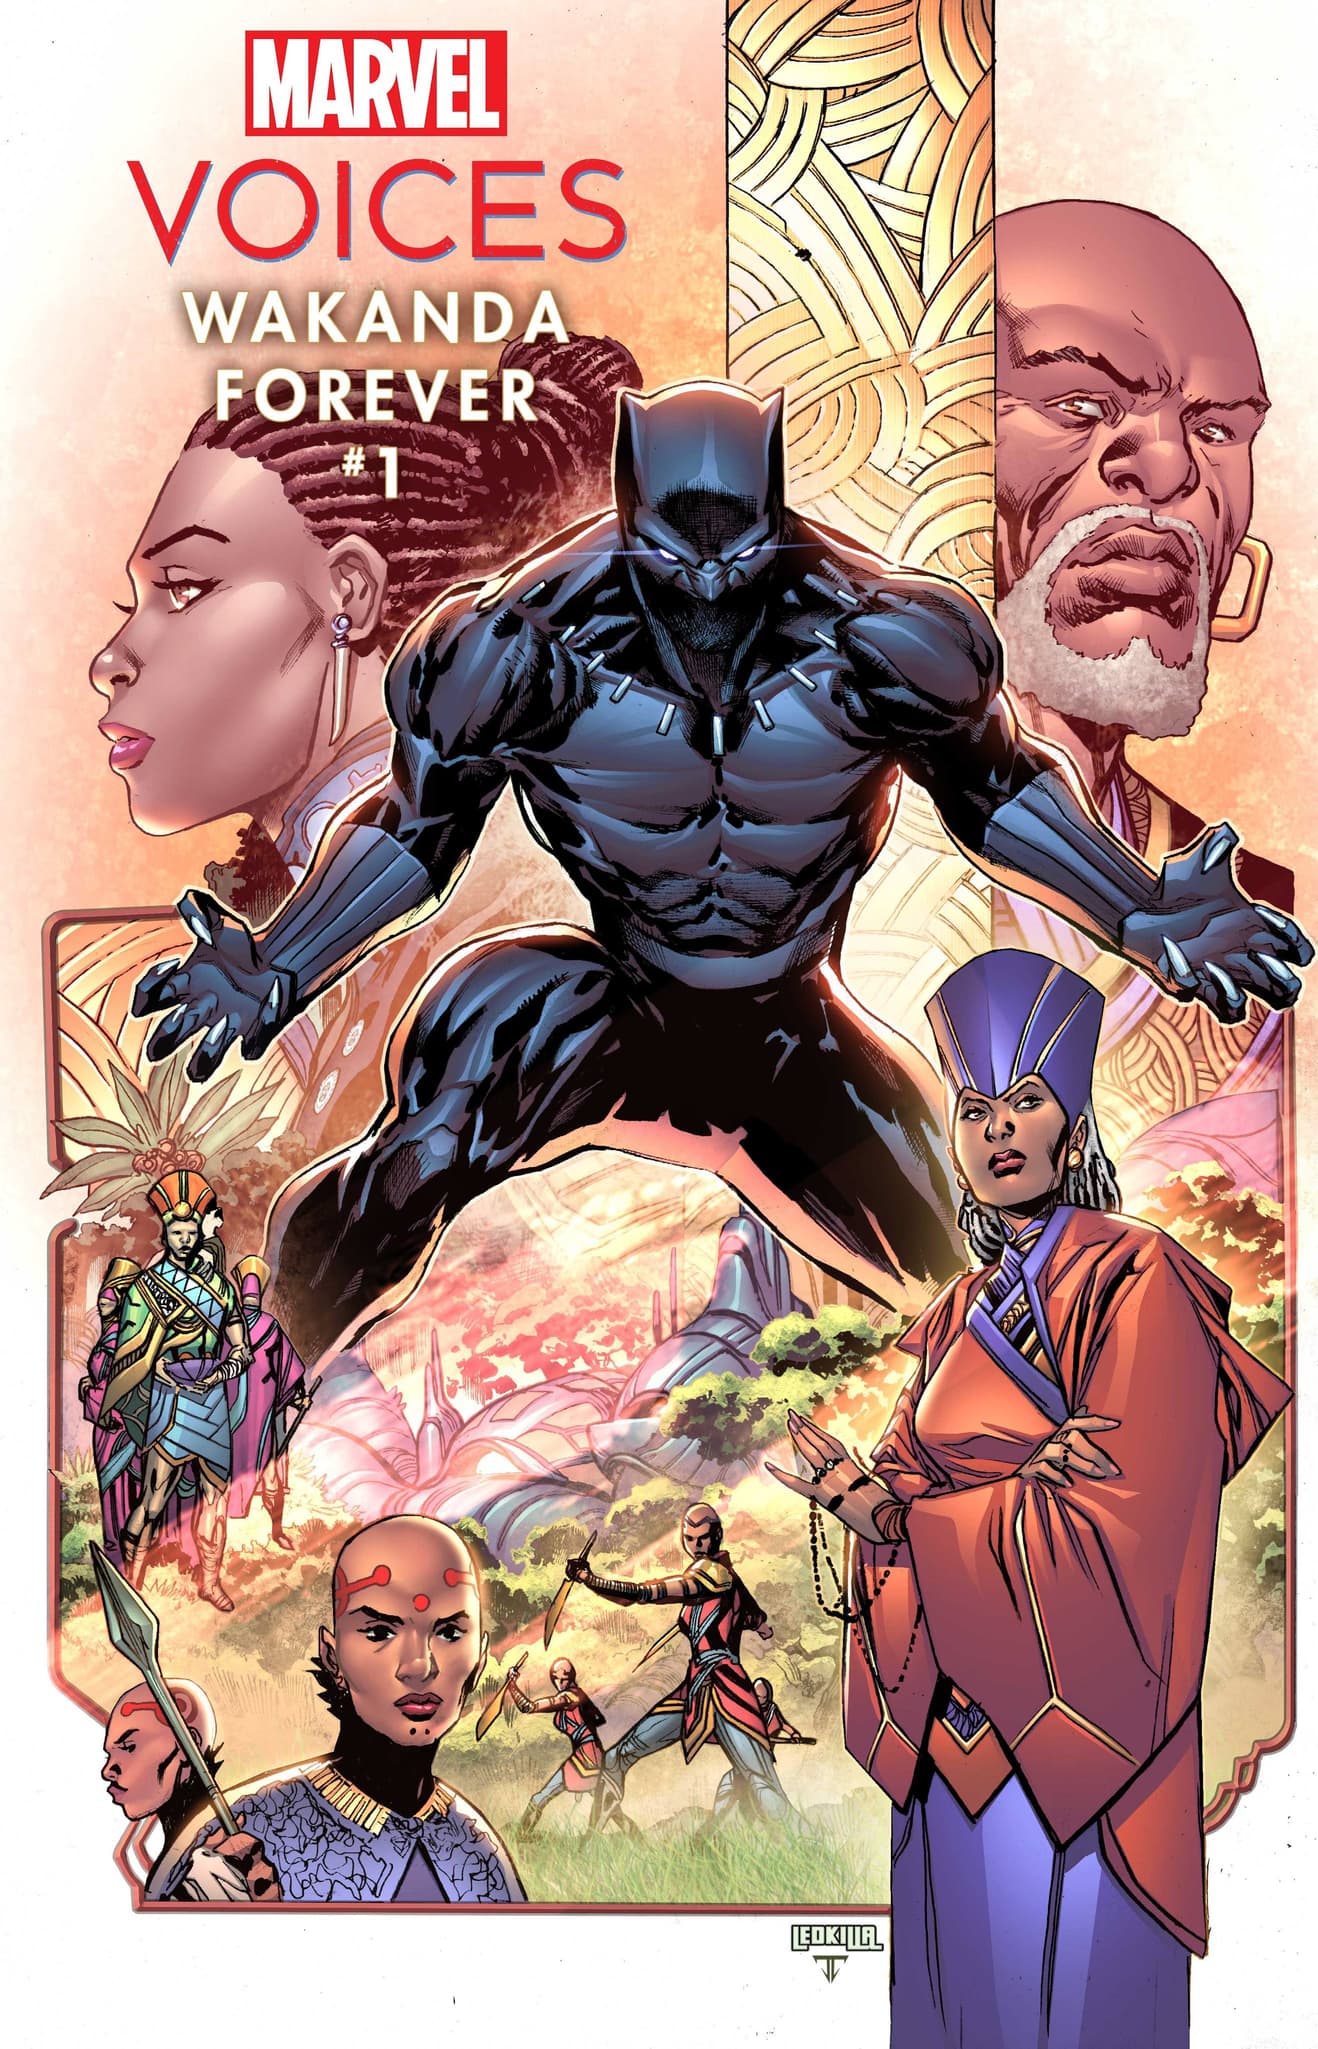 MARVEL’S VOICES: WAKANDA FOREVER #1 main cover by Ken Lashley